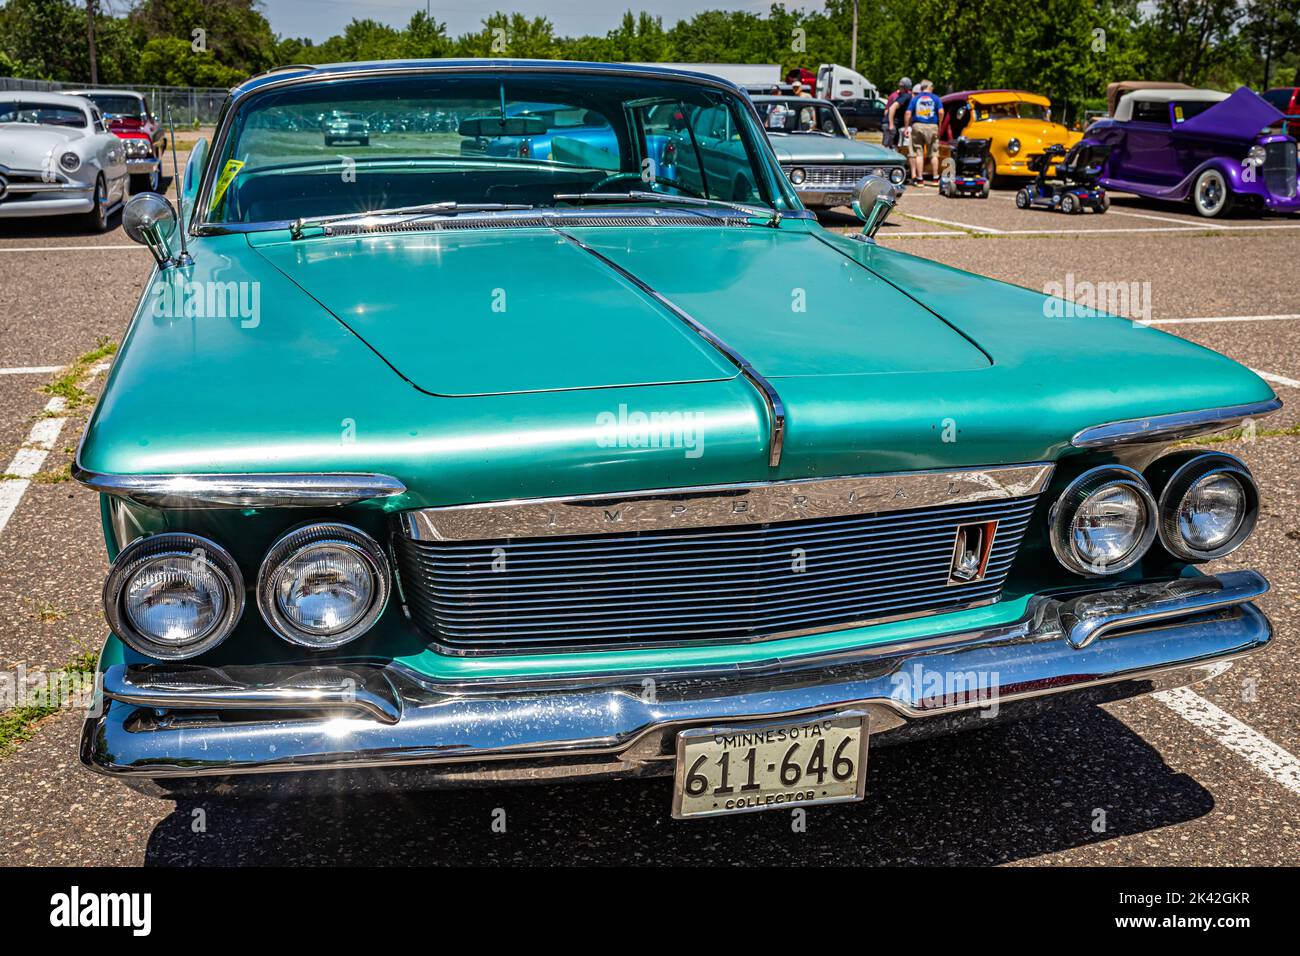 Falcon Heights, MN - June 18, 2022: Wide angle high perspective front view of a 1961 Chrysler Imperial Crown 4 Door Hardtop at a local car show. Stock Photo